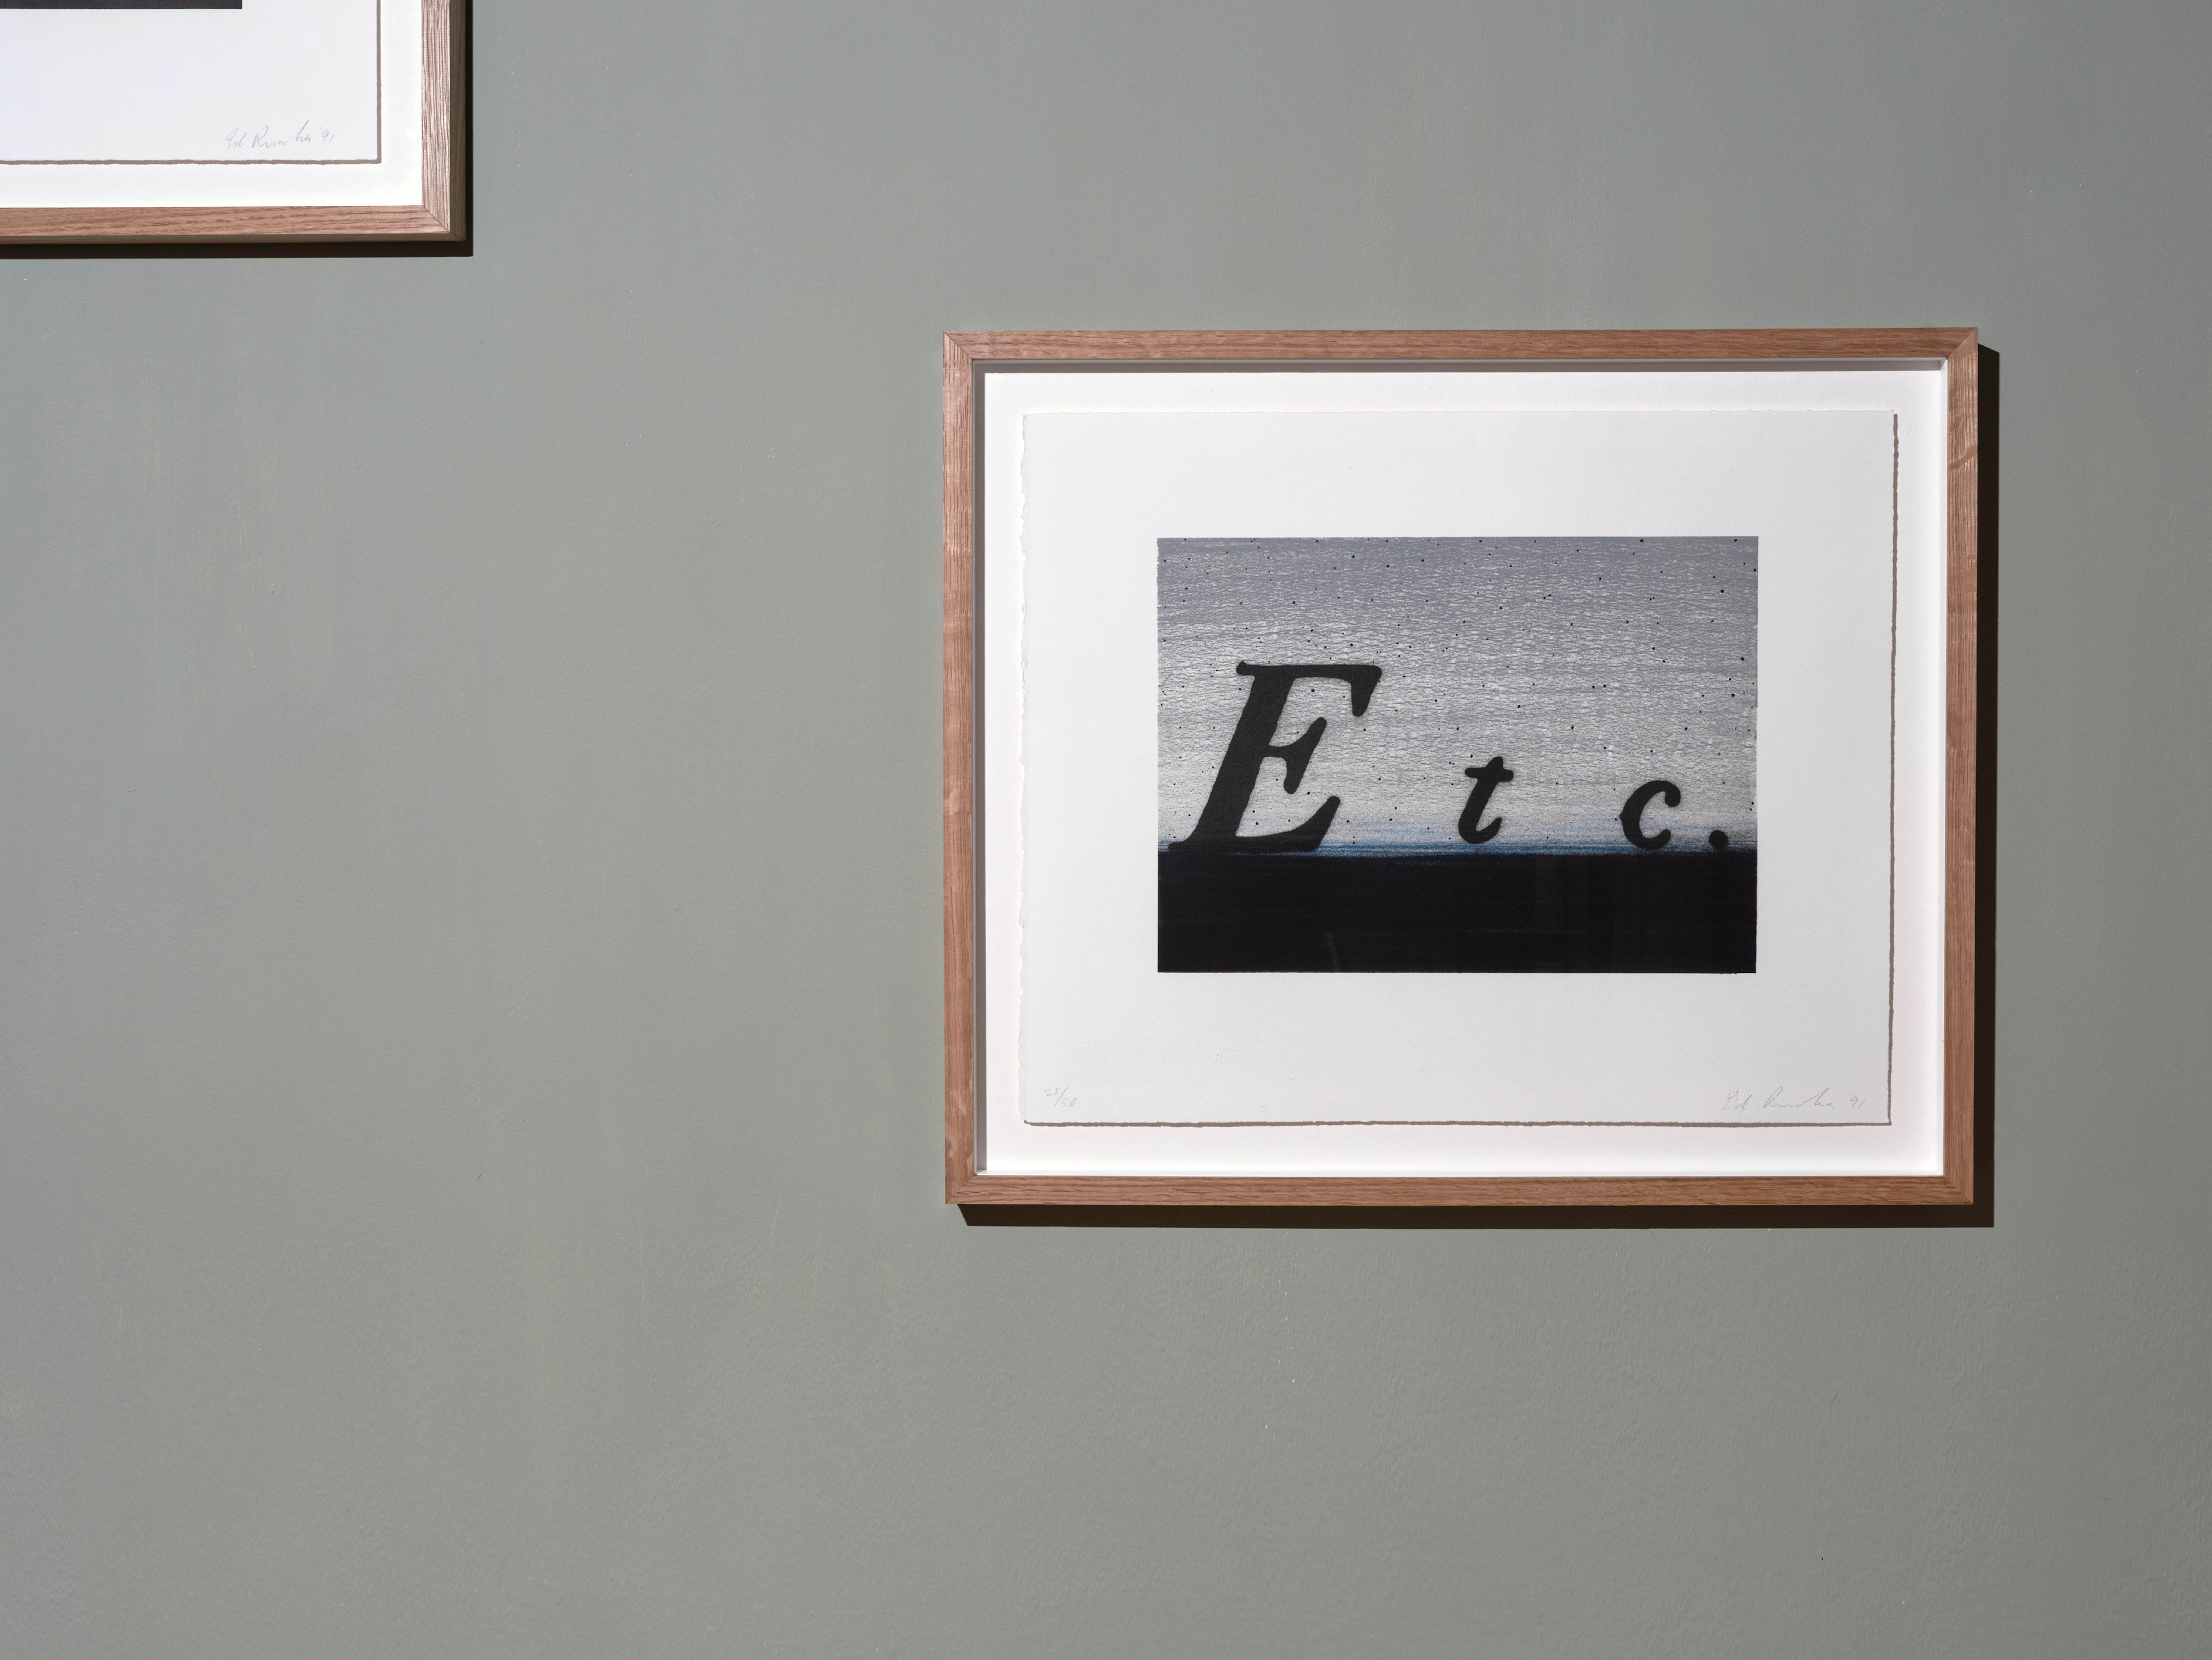 installation photograph of framed lithograph in colours by Ed Ruscha with phrase Etc. in black